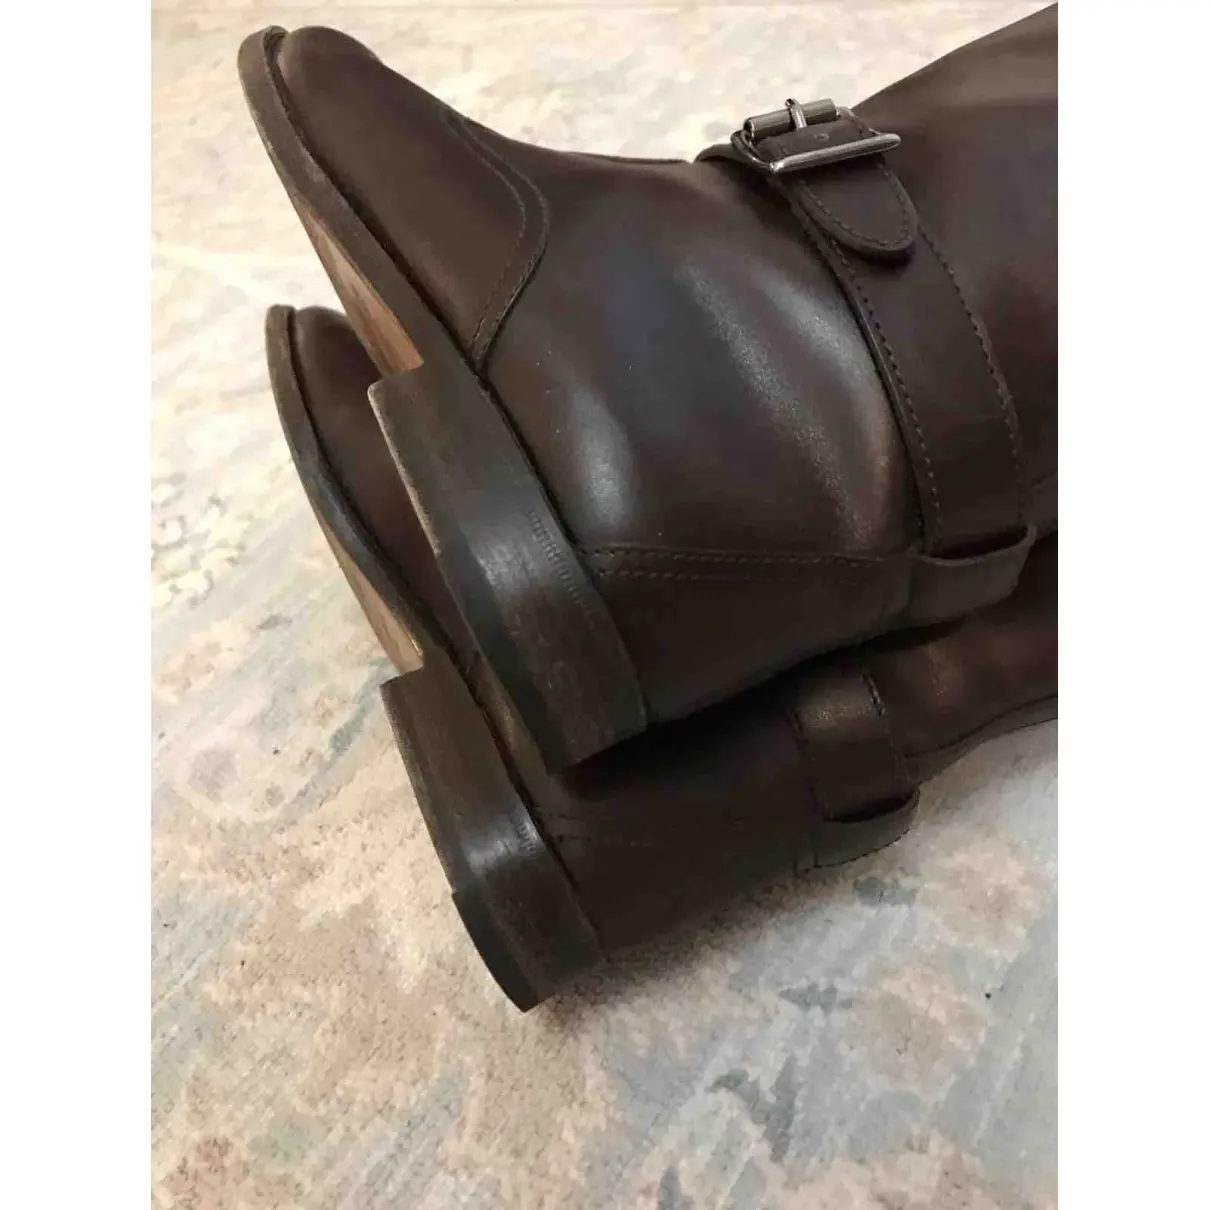 Leather riding boots Manolo Blahnik